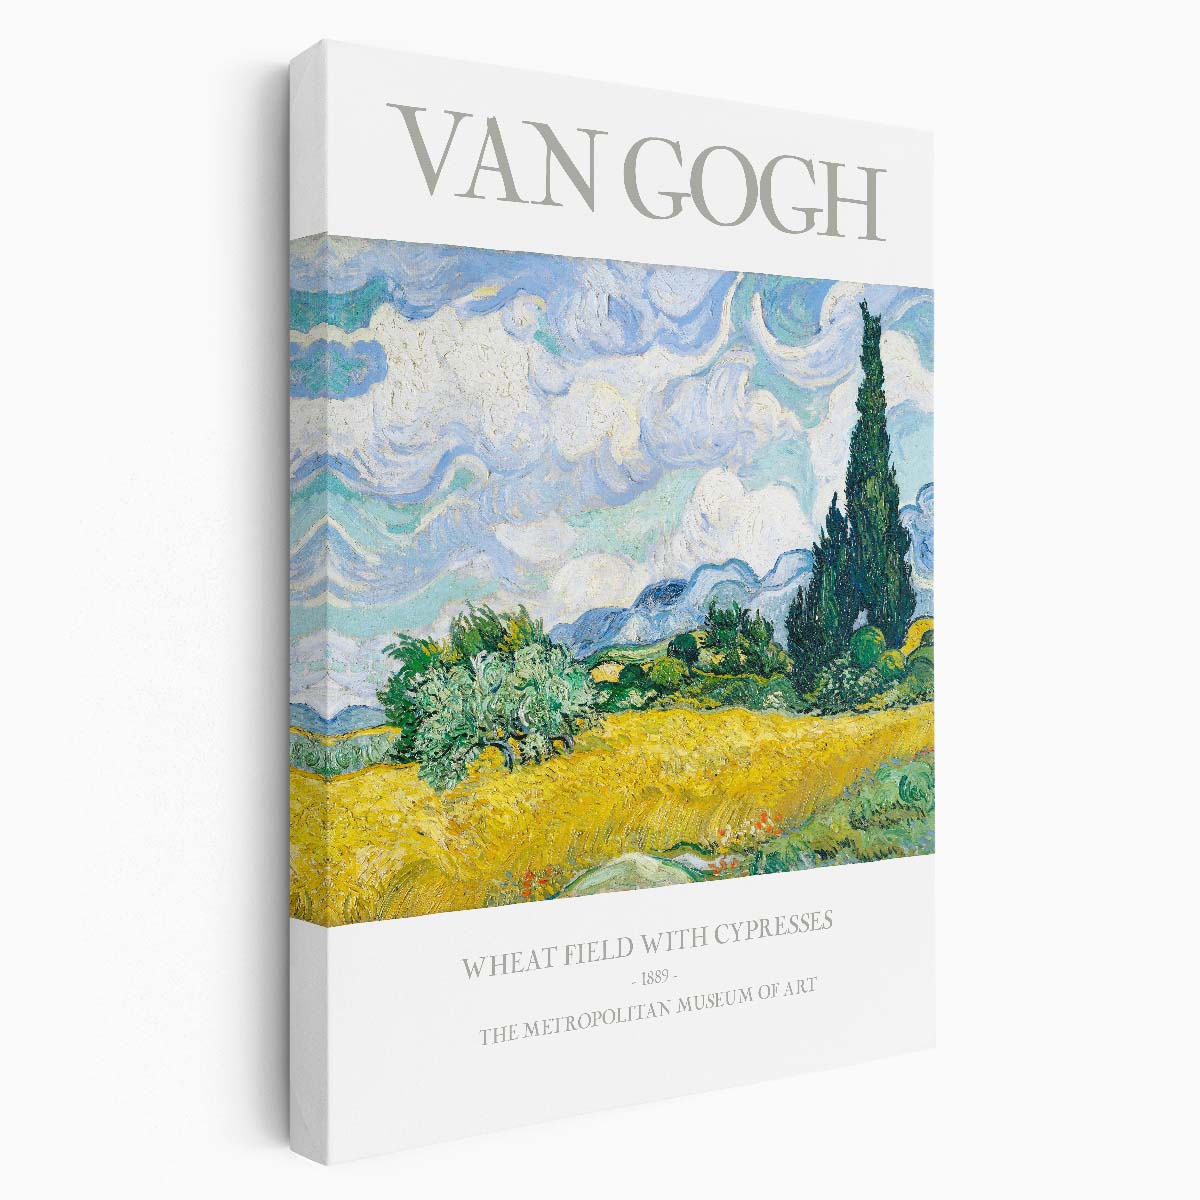 Vincent Van Gogh Acrylic Painting - Wheat Field With Cypresses Poster by Luxuriance Designs, made in USA